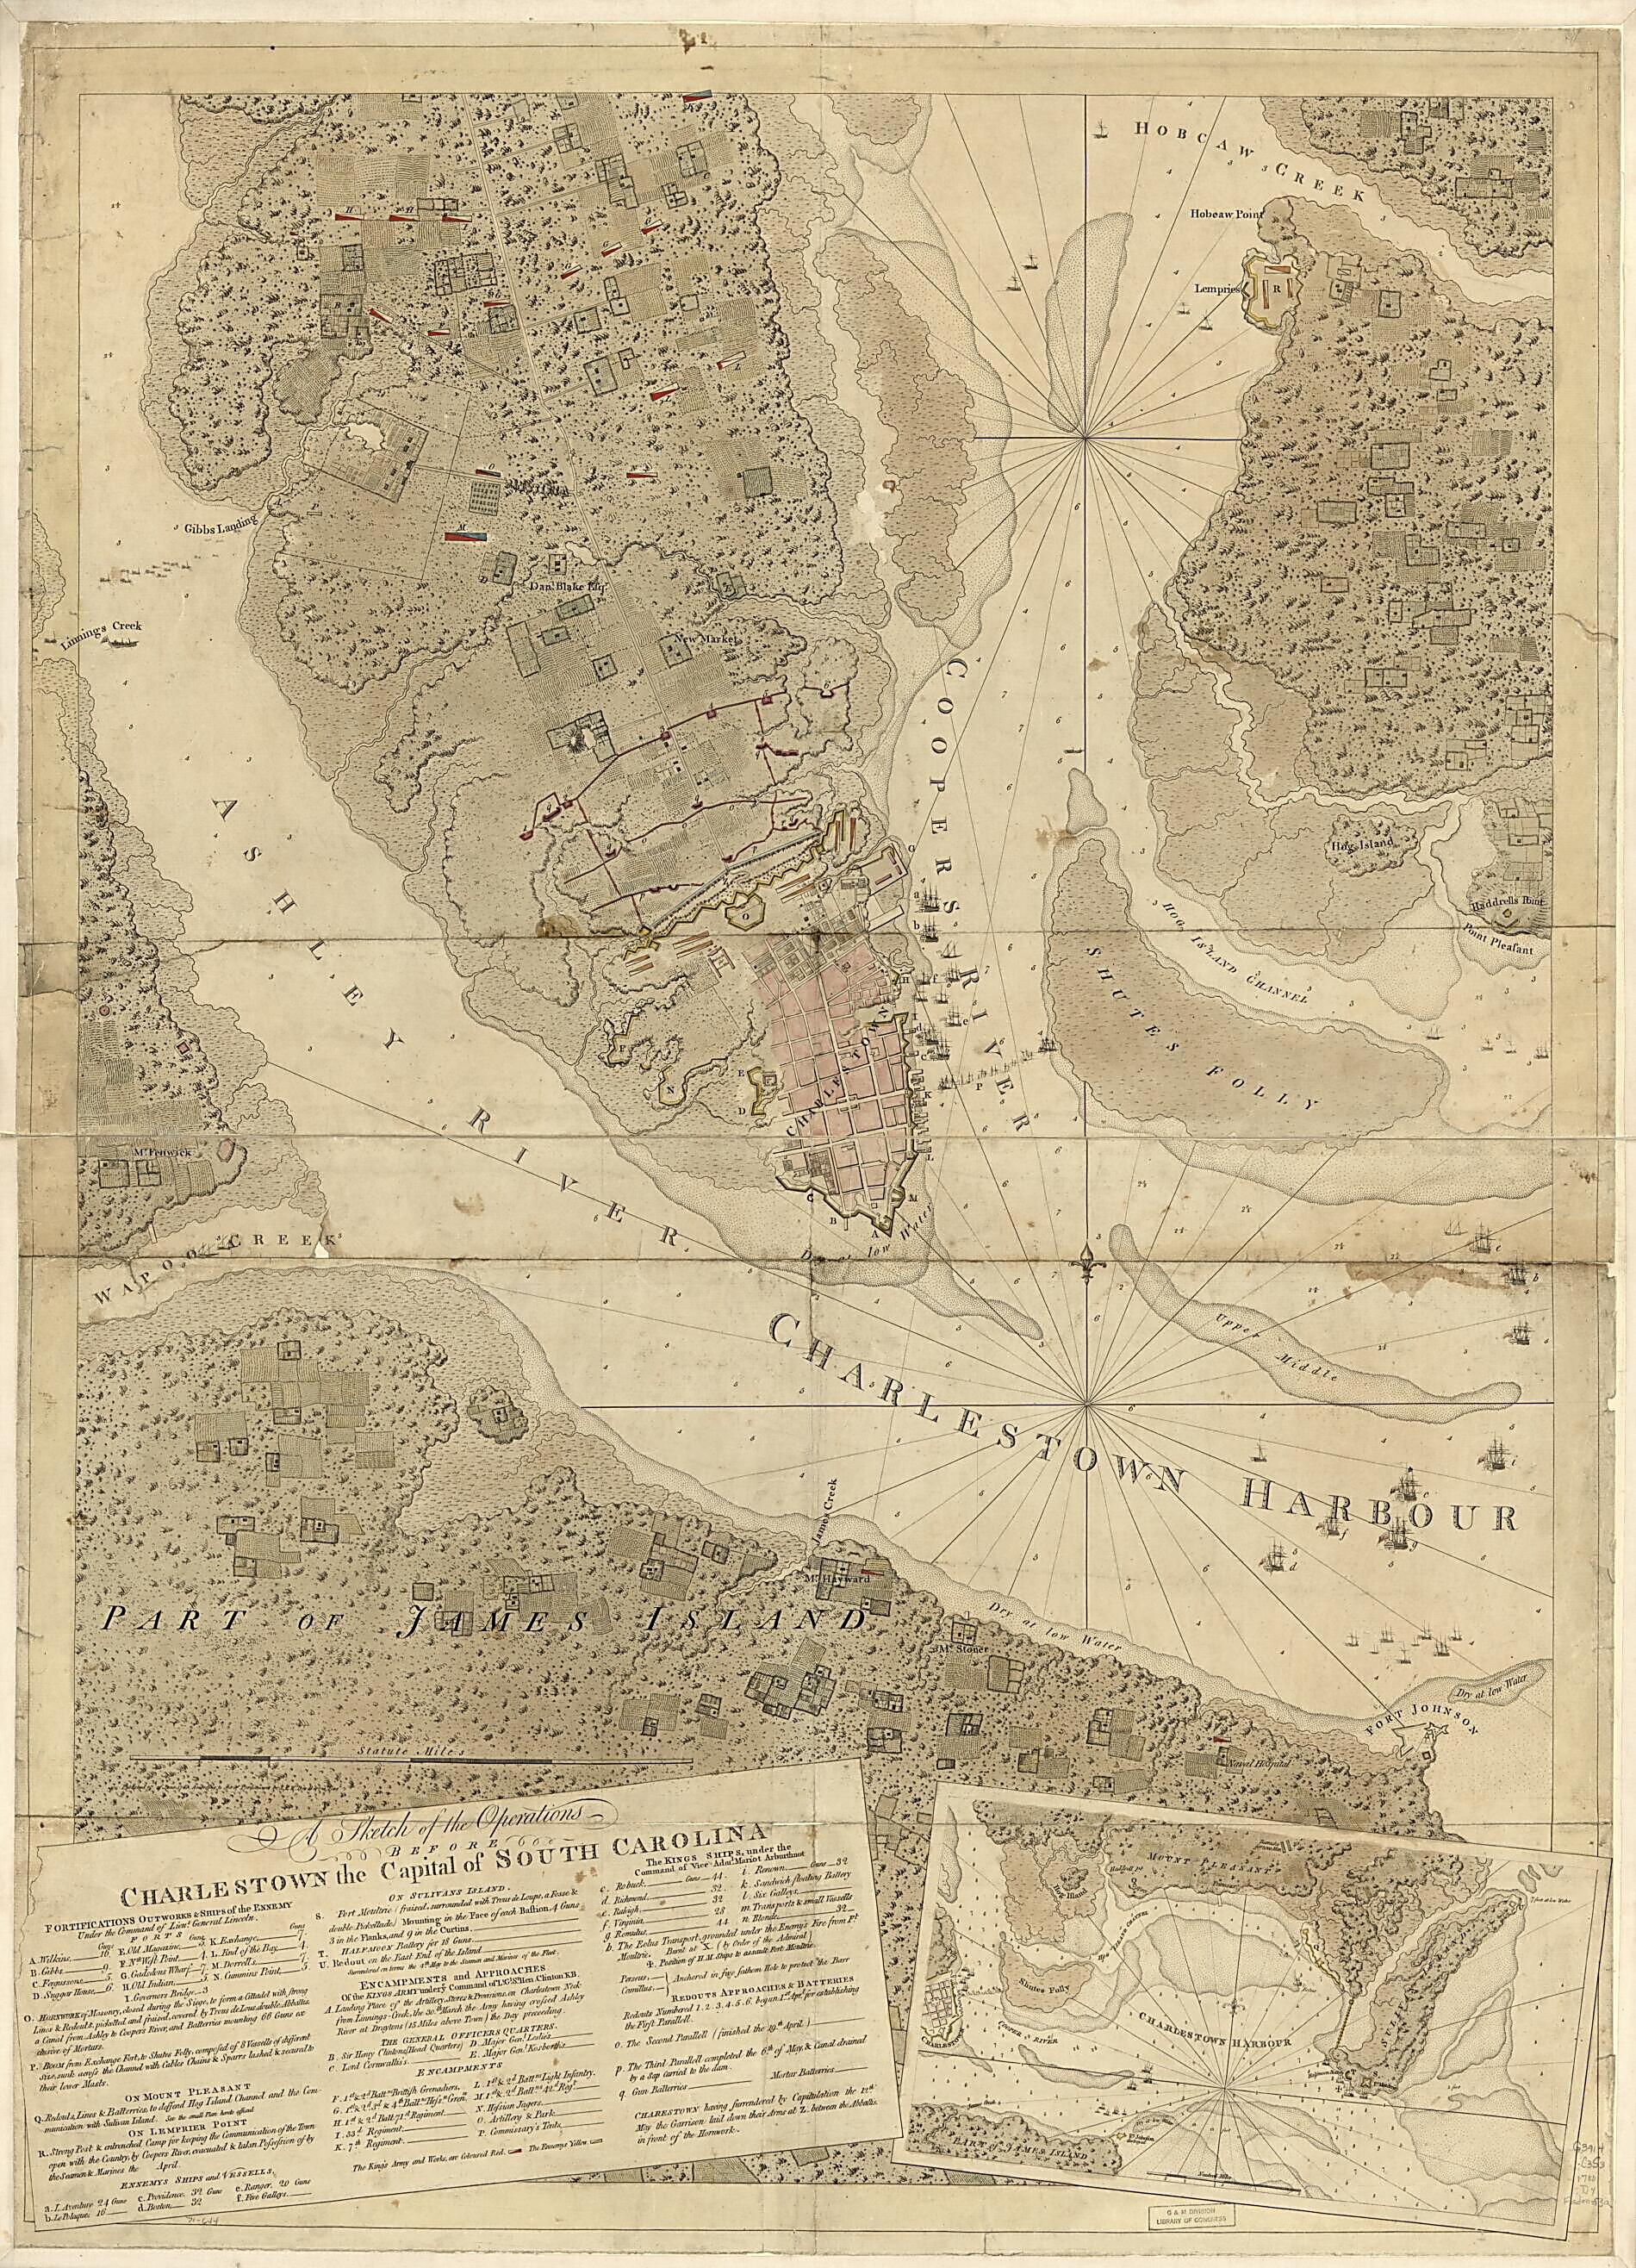 This old map of A Sketch of the Operations Before Charlestown, the Capital of South Carolina from 1780 was created by Joseph F. W. (Joseph Frederick Wallet) Des Barres in 1780